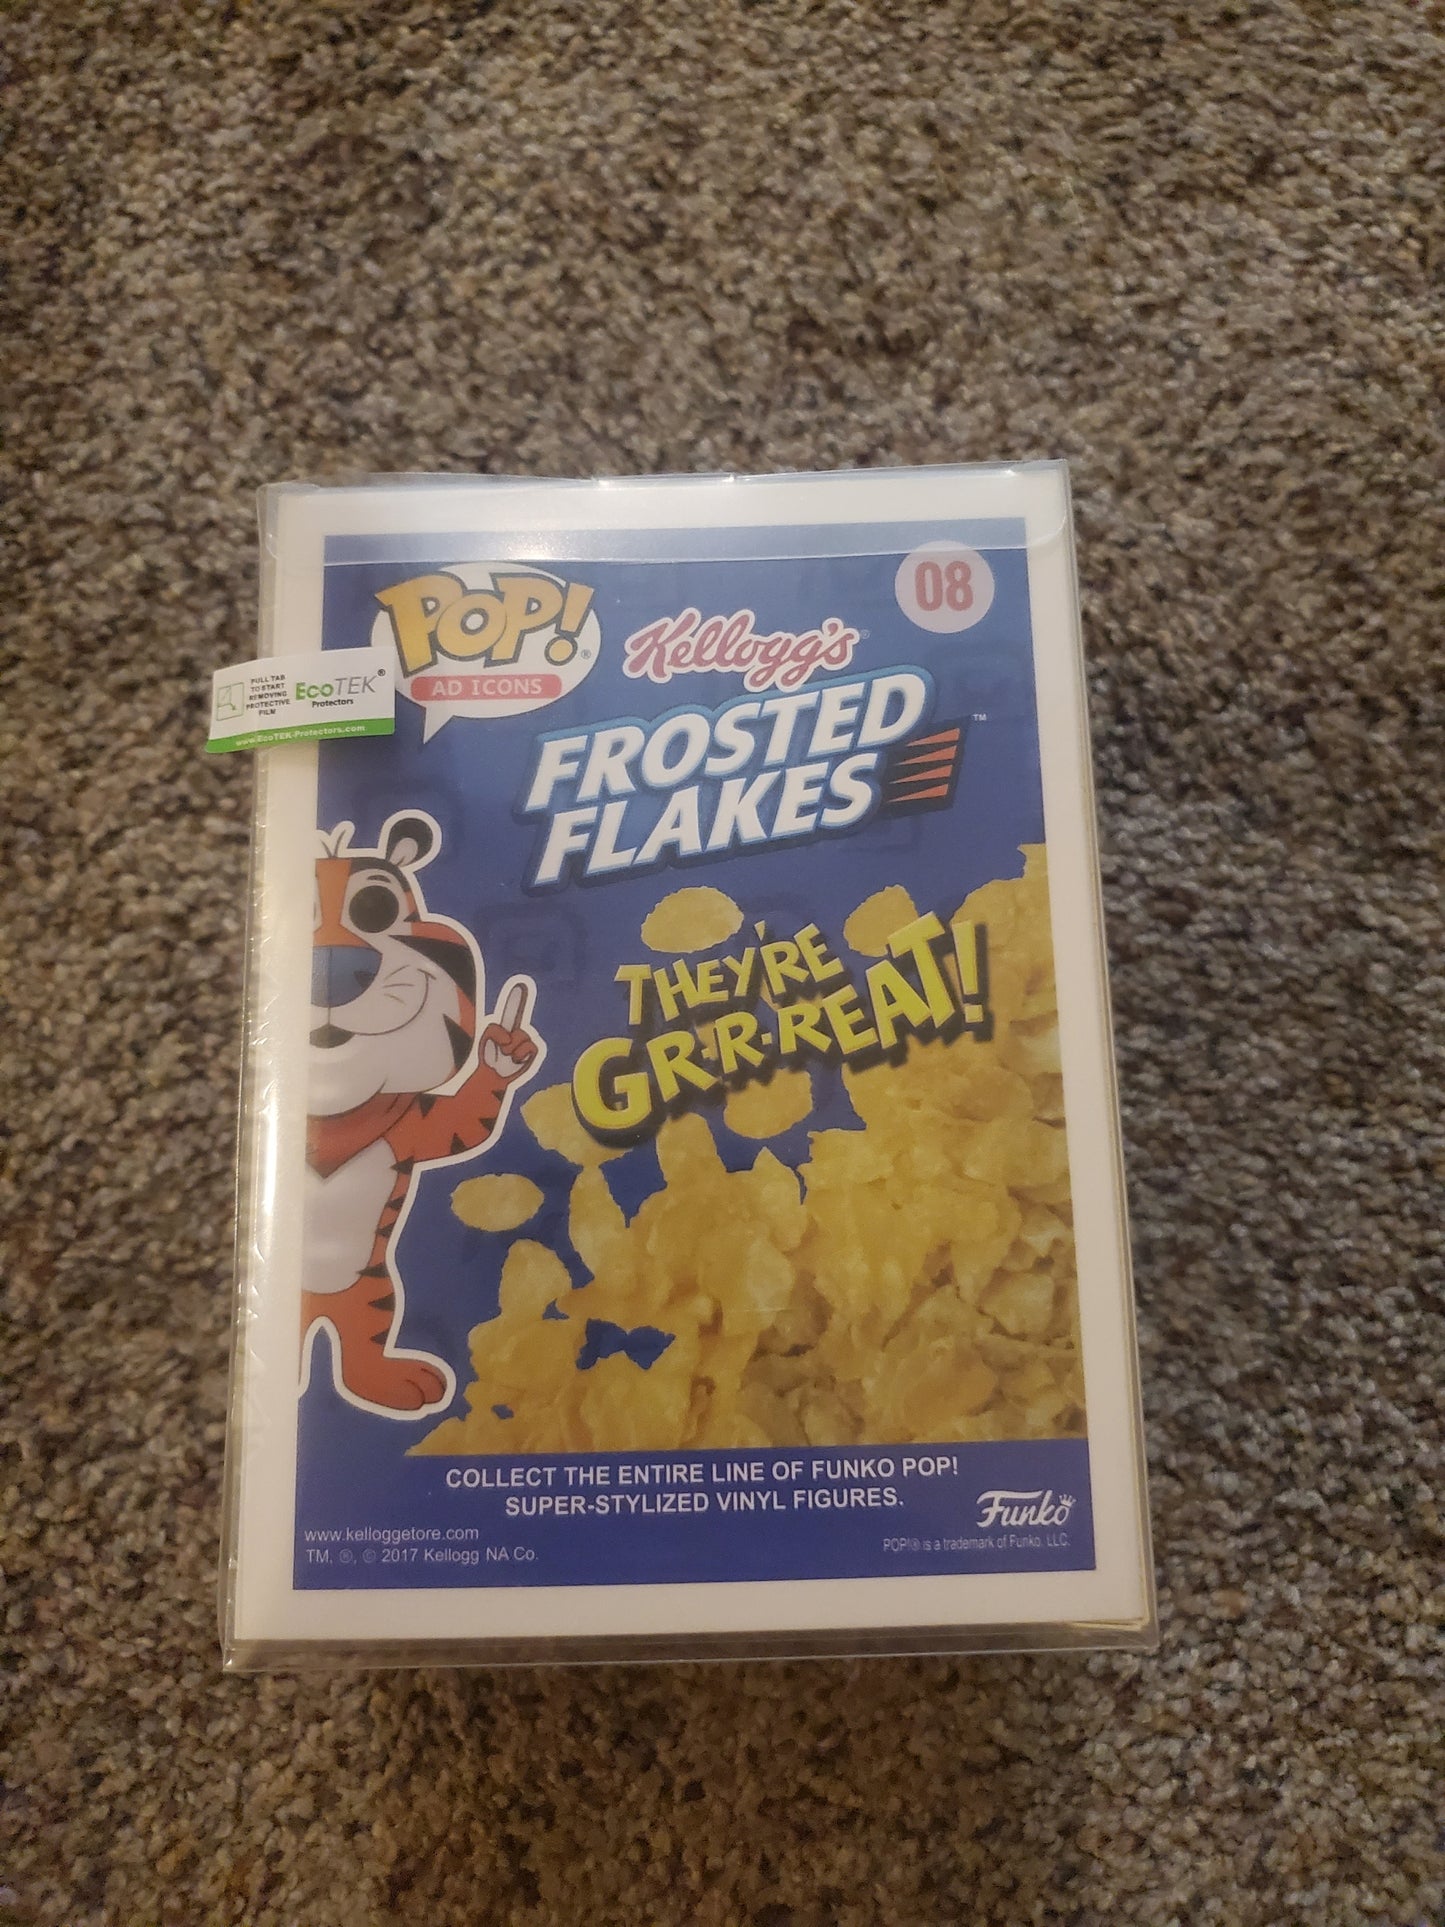 Funko Pop! Frosted Flakes Tony The Tiger Ad Icons #08 LE 3000 Excl POP Protector